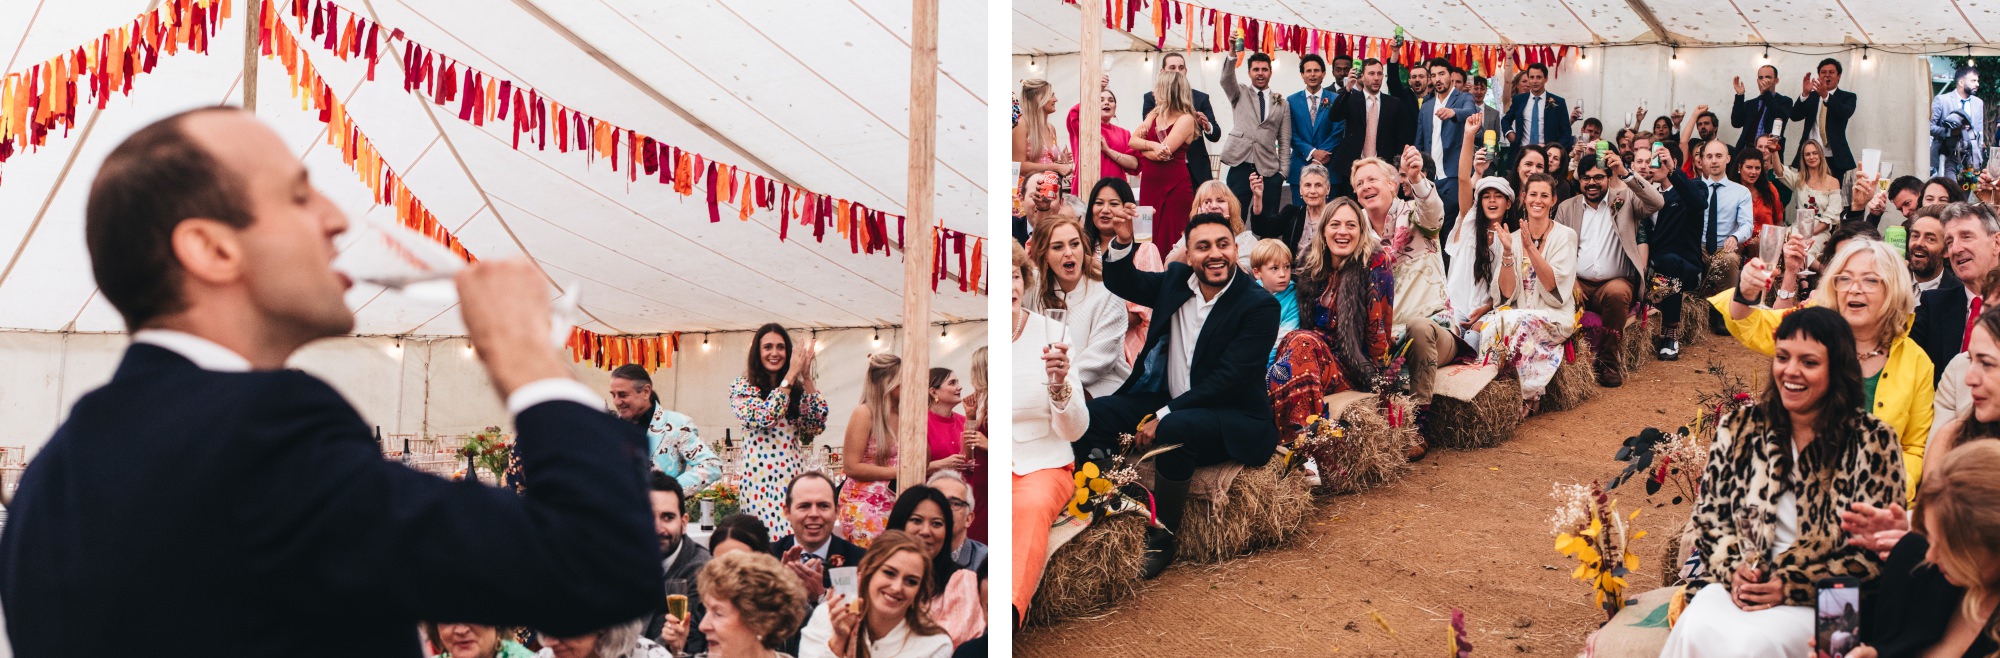 groom drinking from champagne glass before speech, guests sitting watching on hay bales